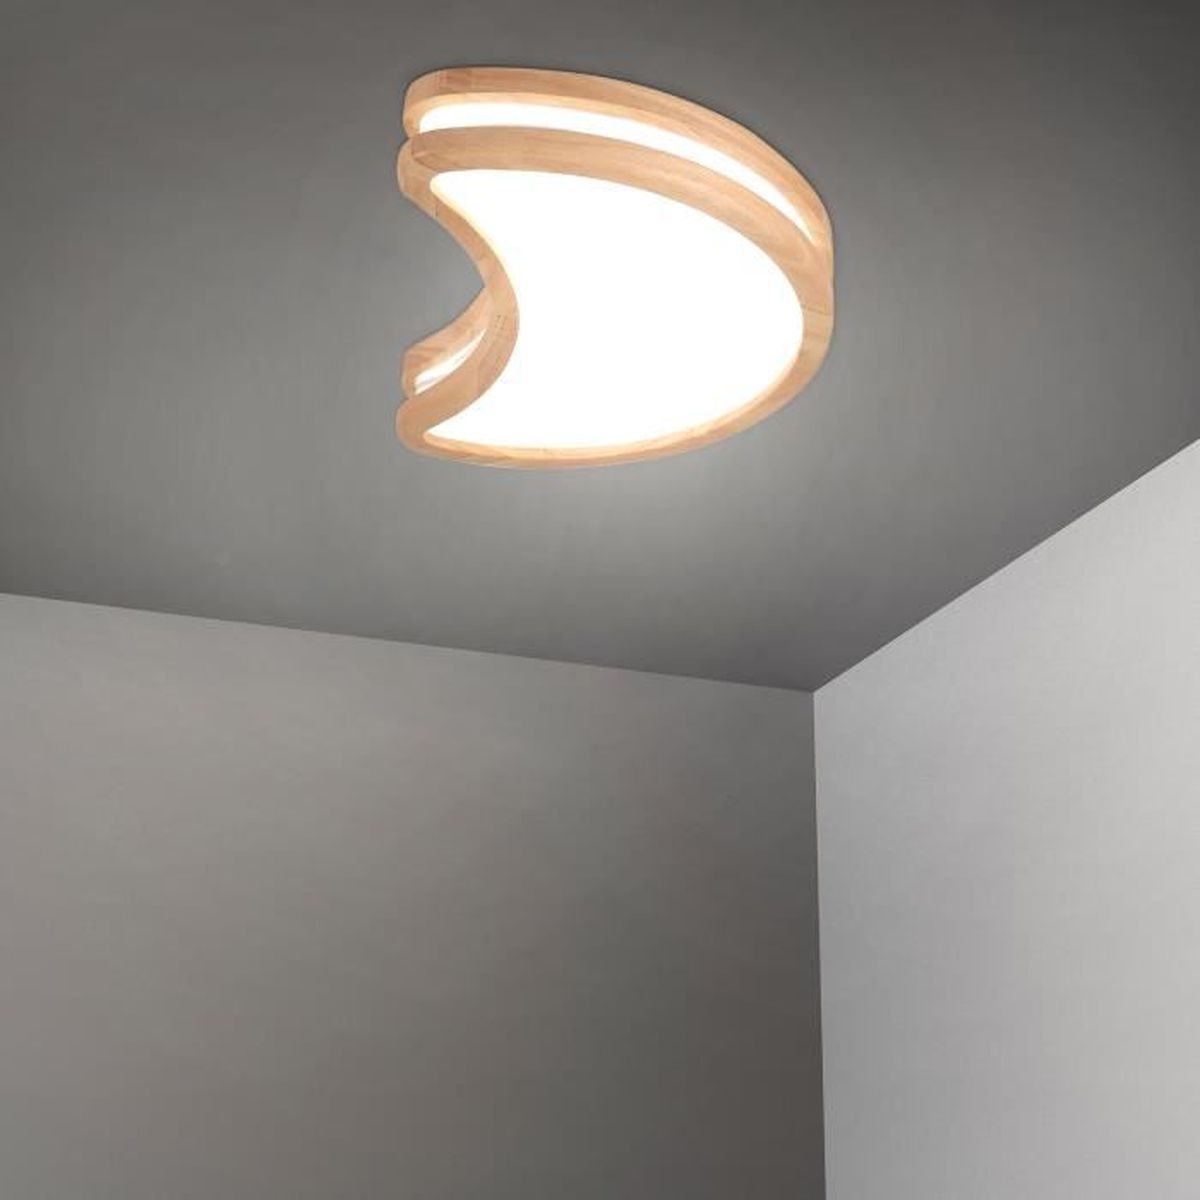 Lumiere led plafond a coller - Cdiscount